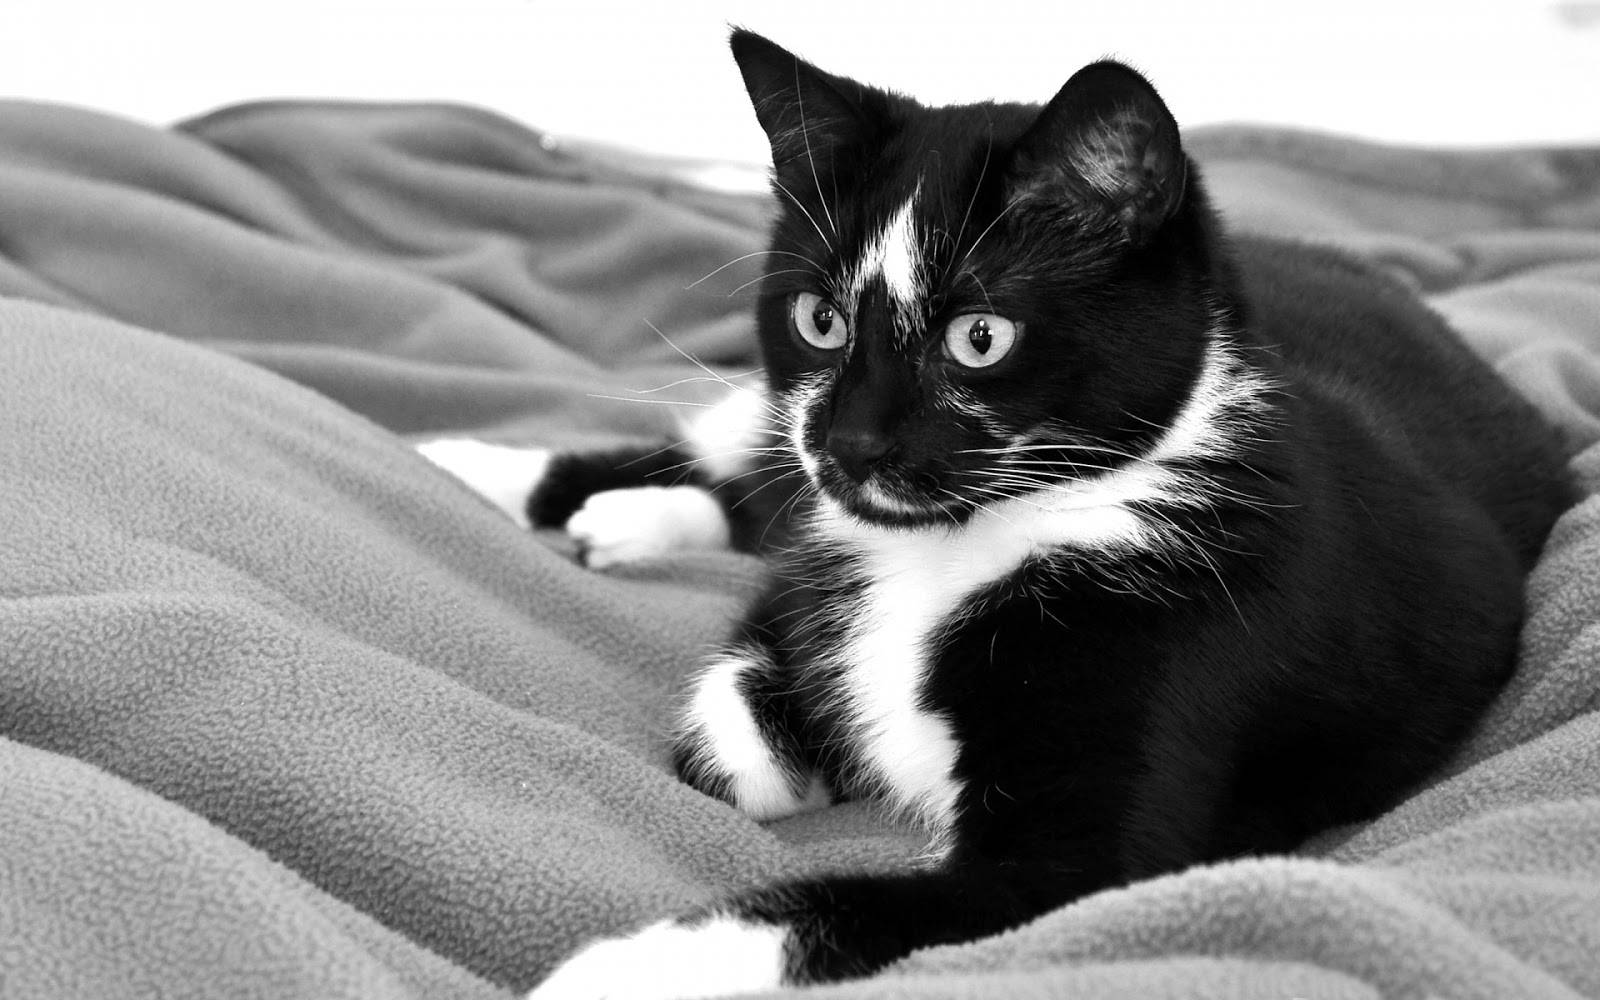 Black And White Cat On A Soft Blanket Wallpaper